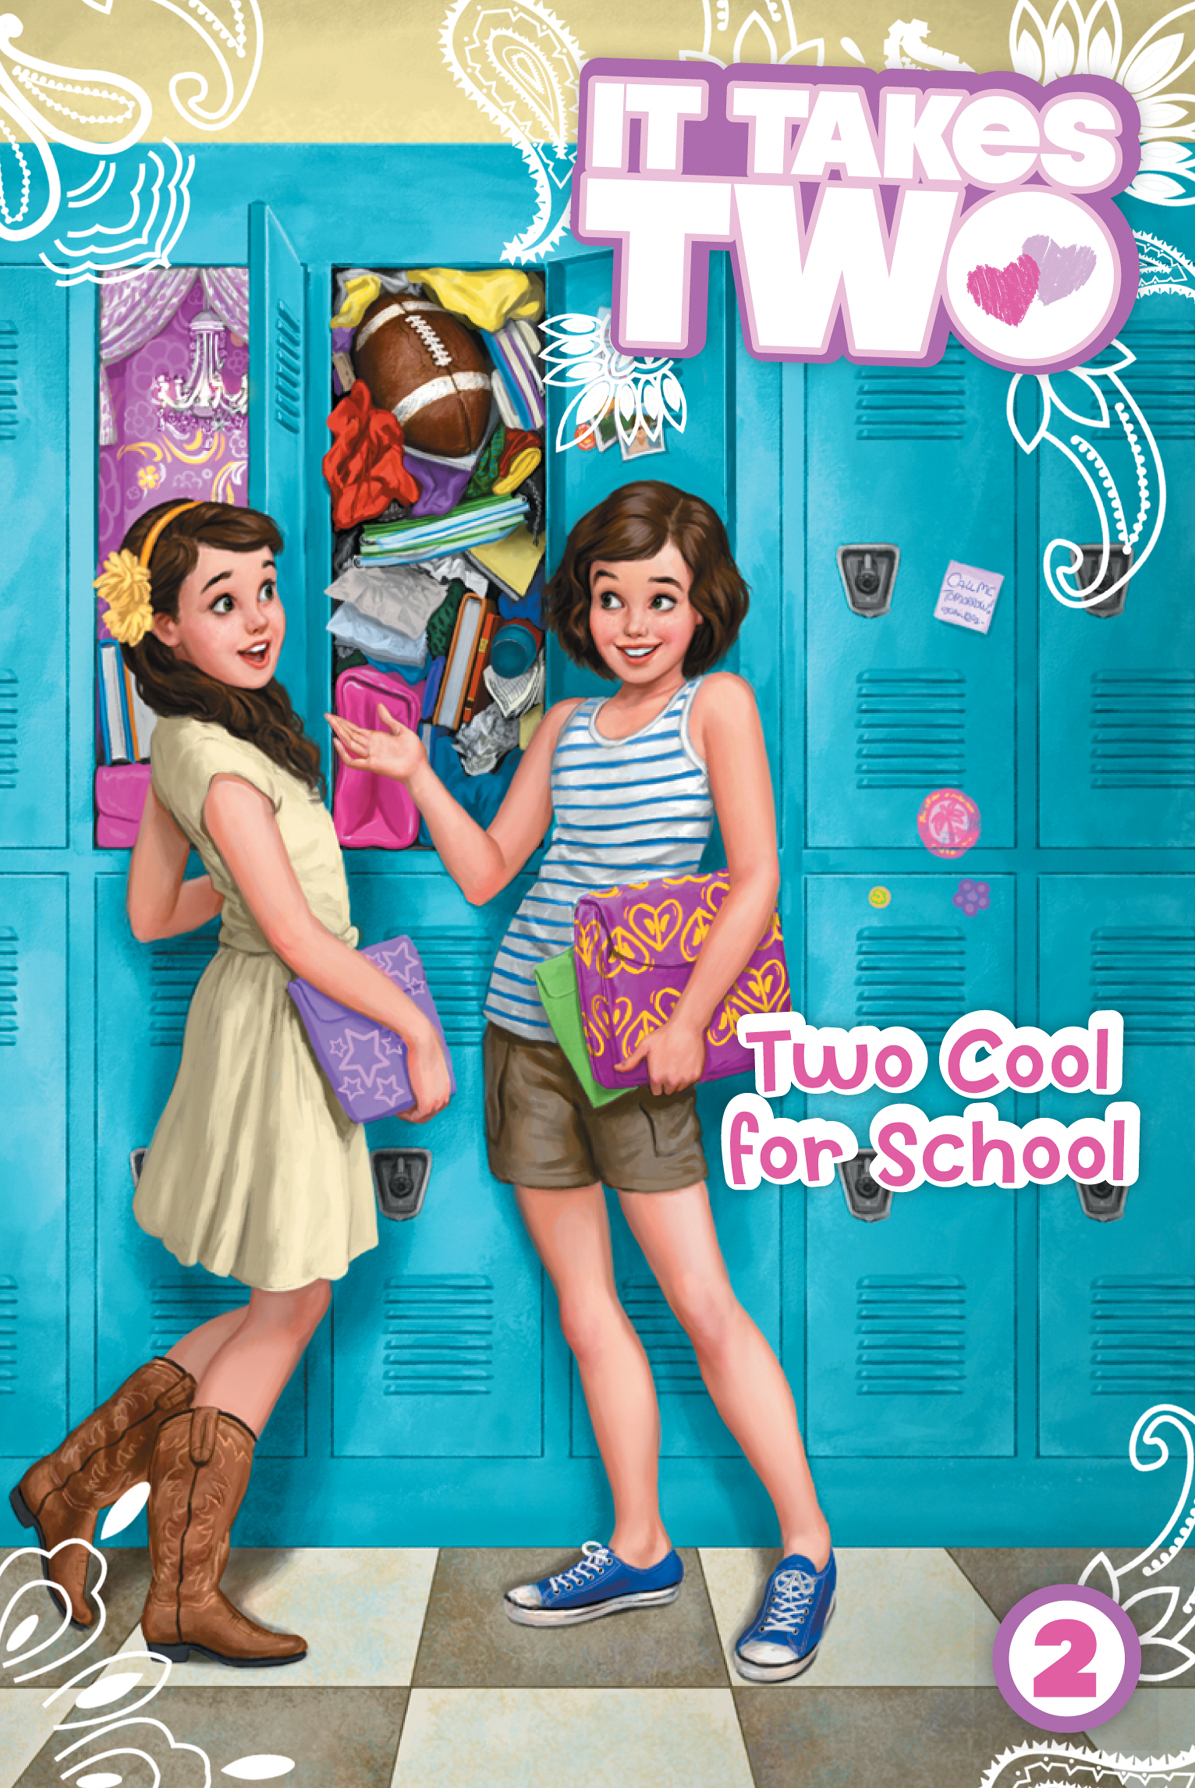 Two Cool for School by Belle Payton